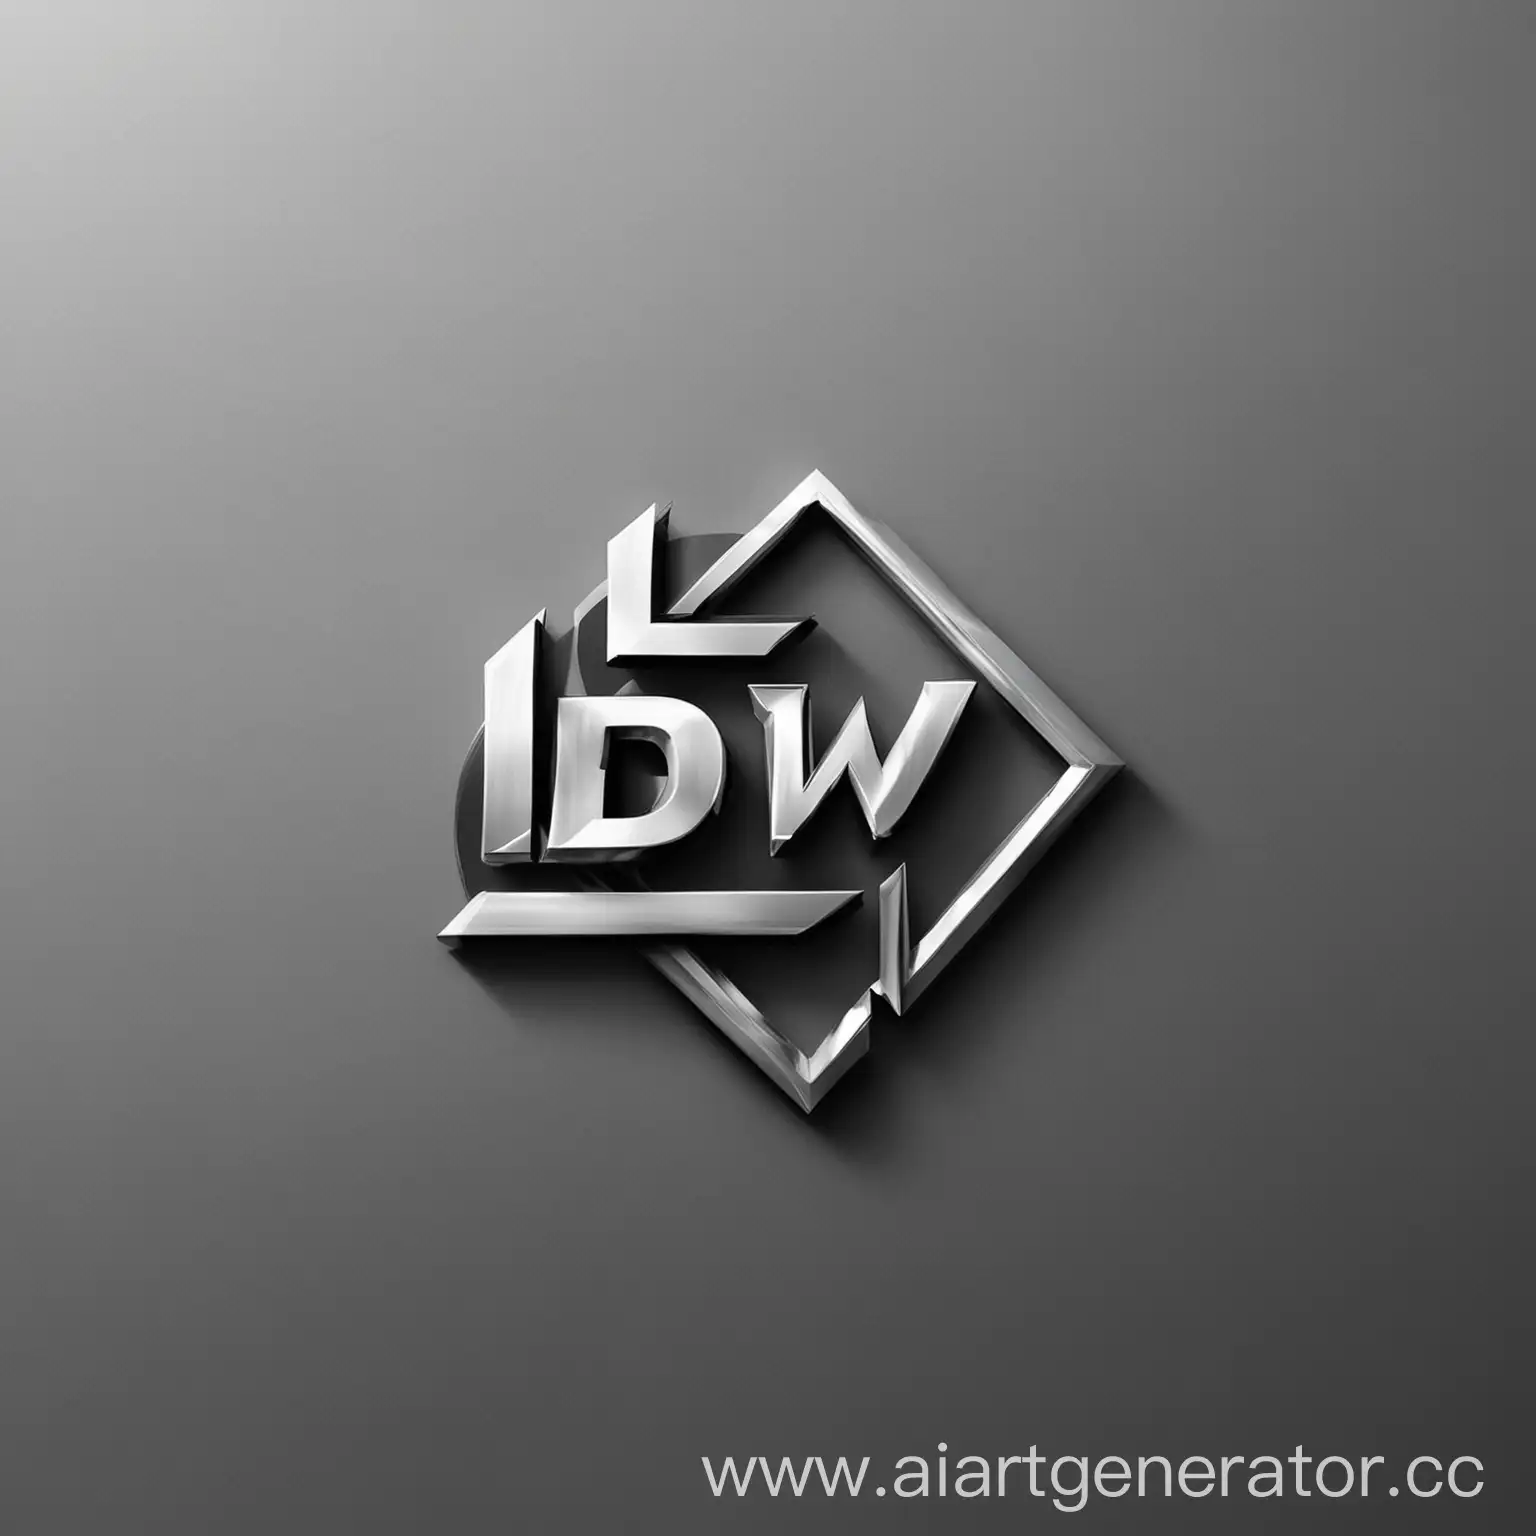 Modern-LDV-Company-Logo-Design-with-Abstract-Geometric-Elements